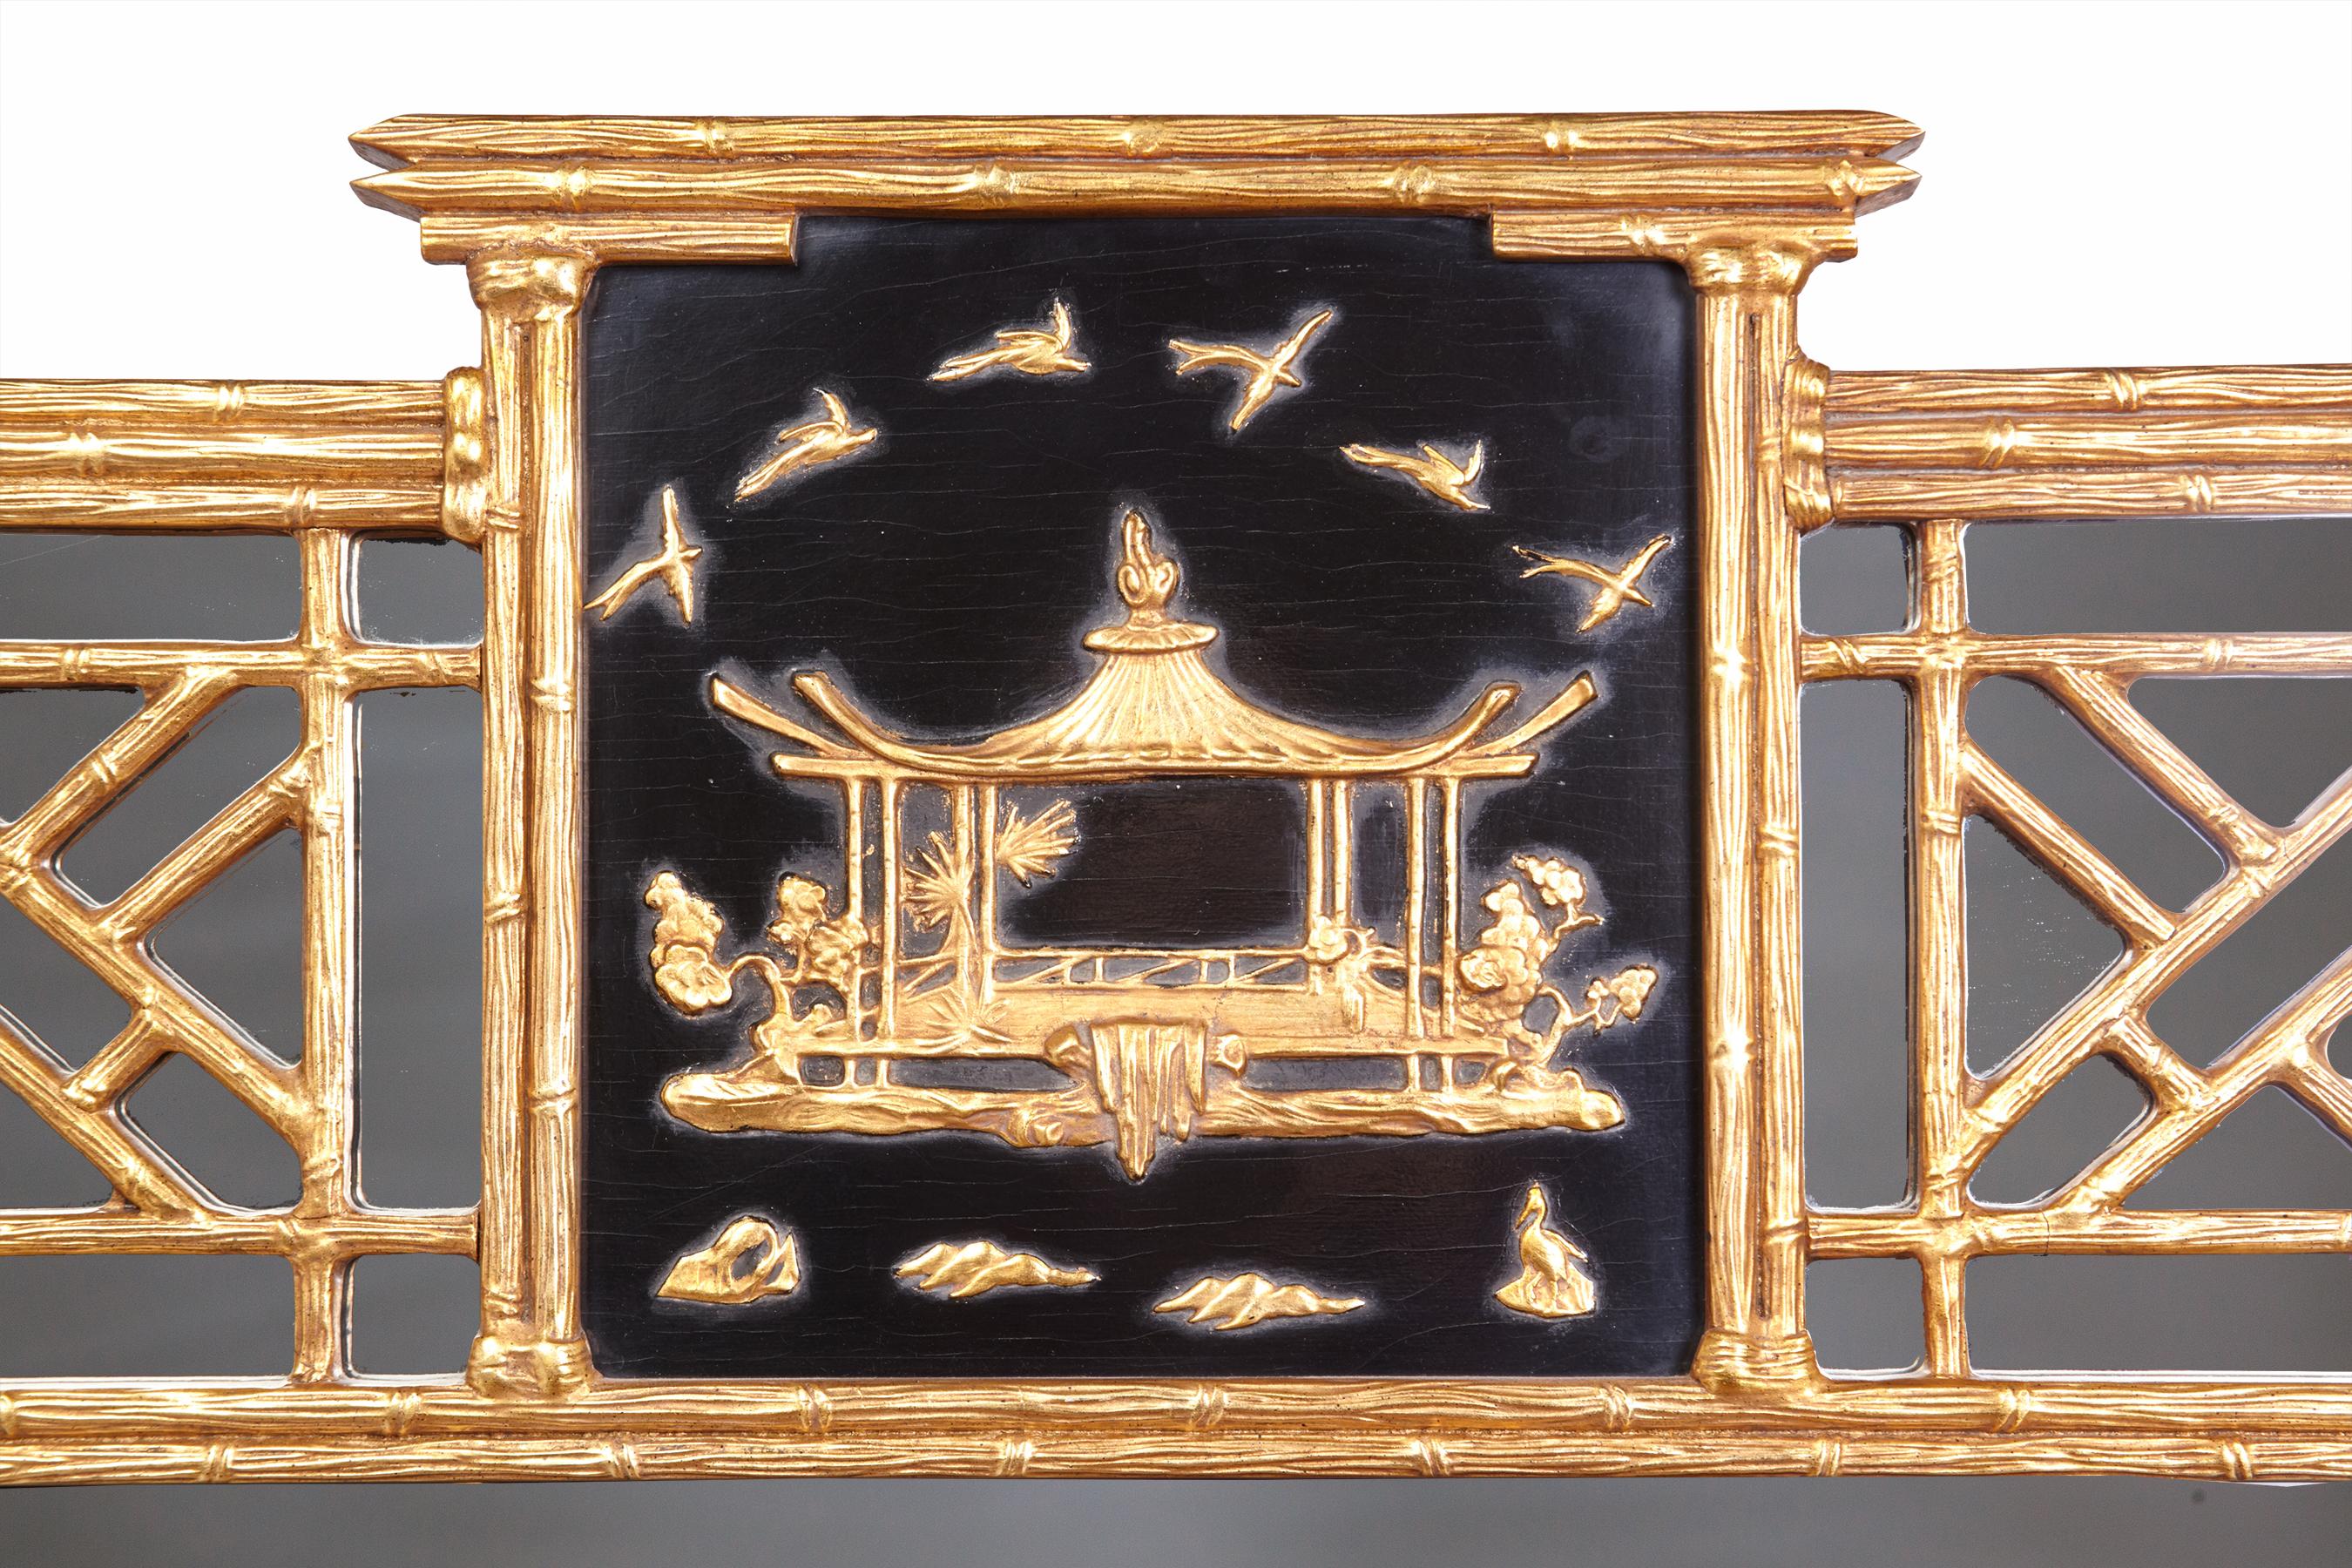 Dramatic large 20th century custom made Friedman Brothers Mirror. The beveled mirror is framed in gold faux bamboo topped with a gold pagoda set against a black background.
Pleasing dimensions make it a stunning addition to any room. In excellent